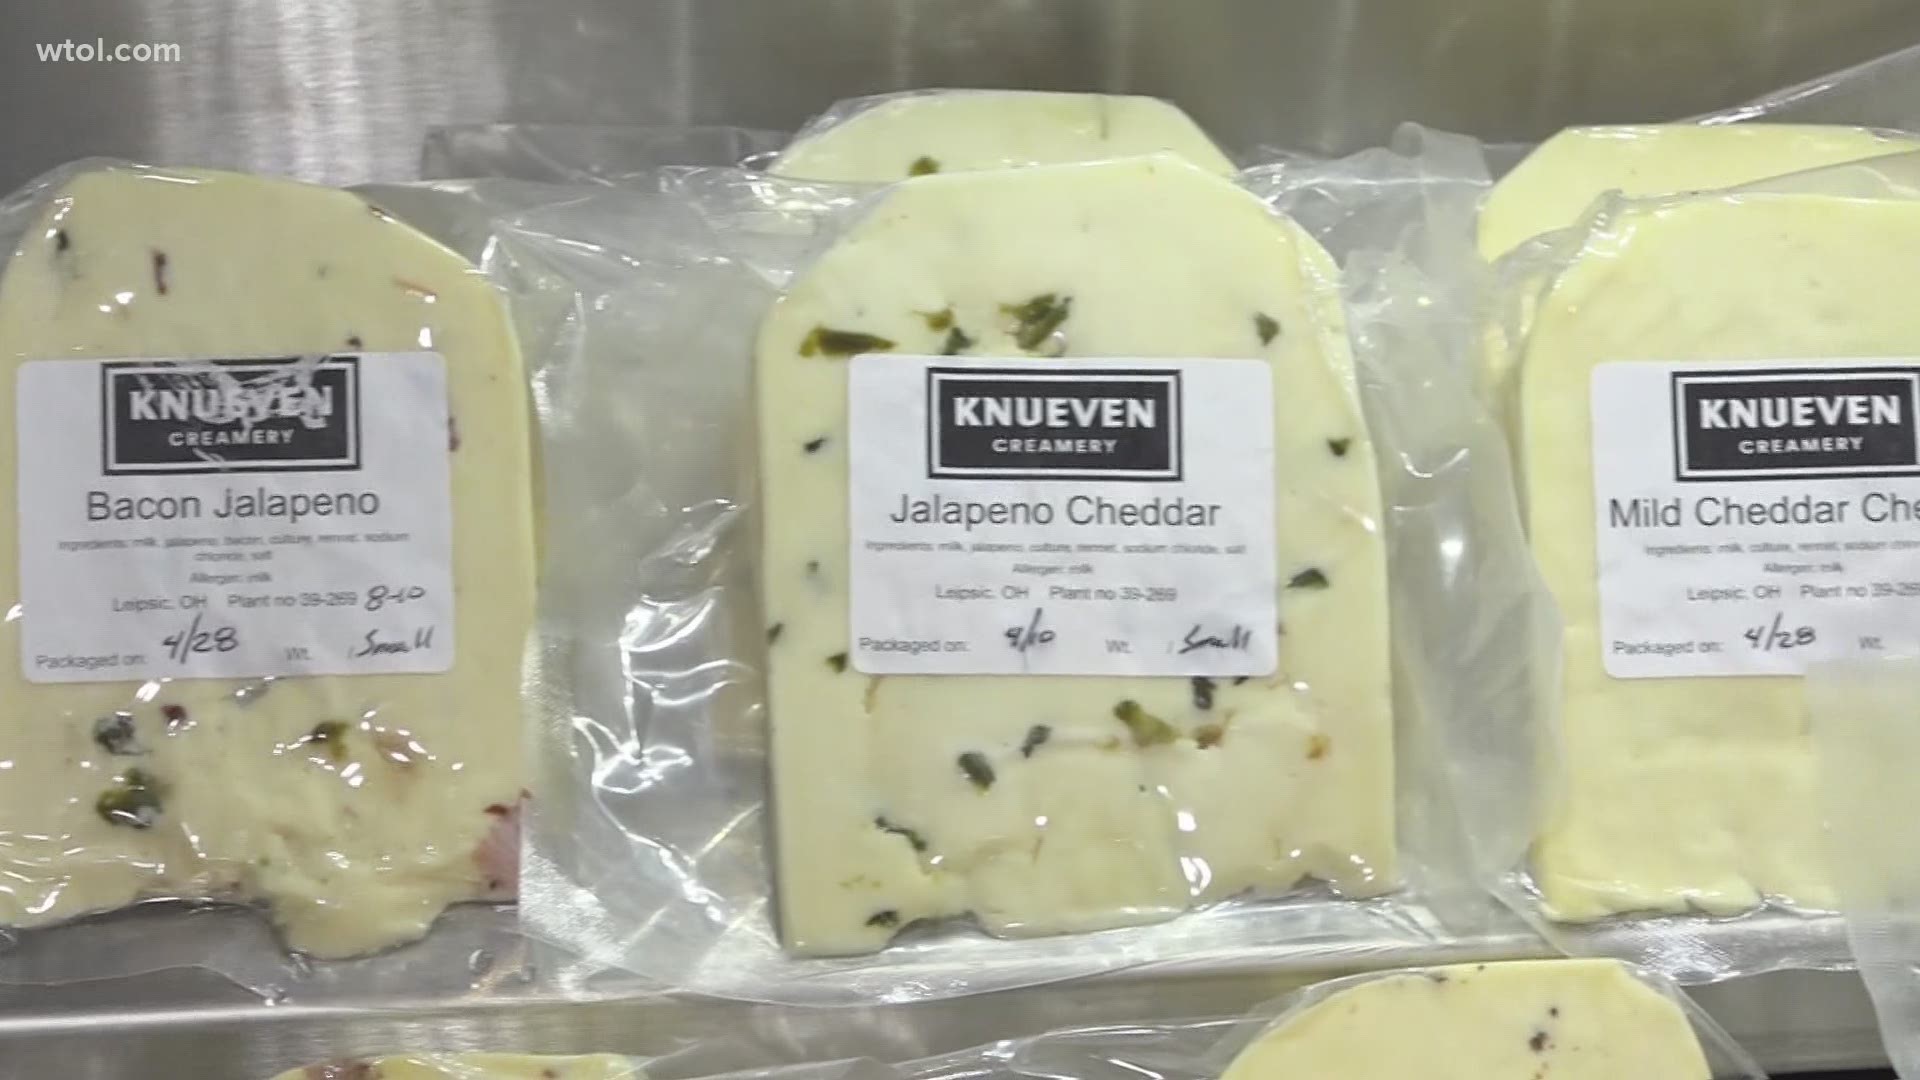 For 3 years, the family-owned dairy farm has sold artisan dairy goods at farmers markets and online, but will soon open their own storefront around Memorial Day.